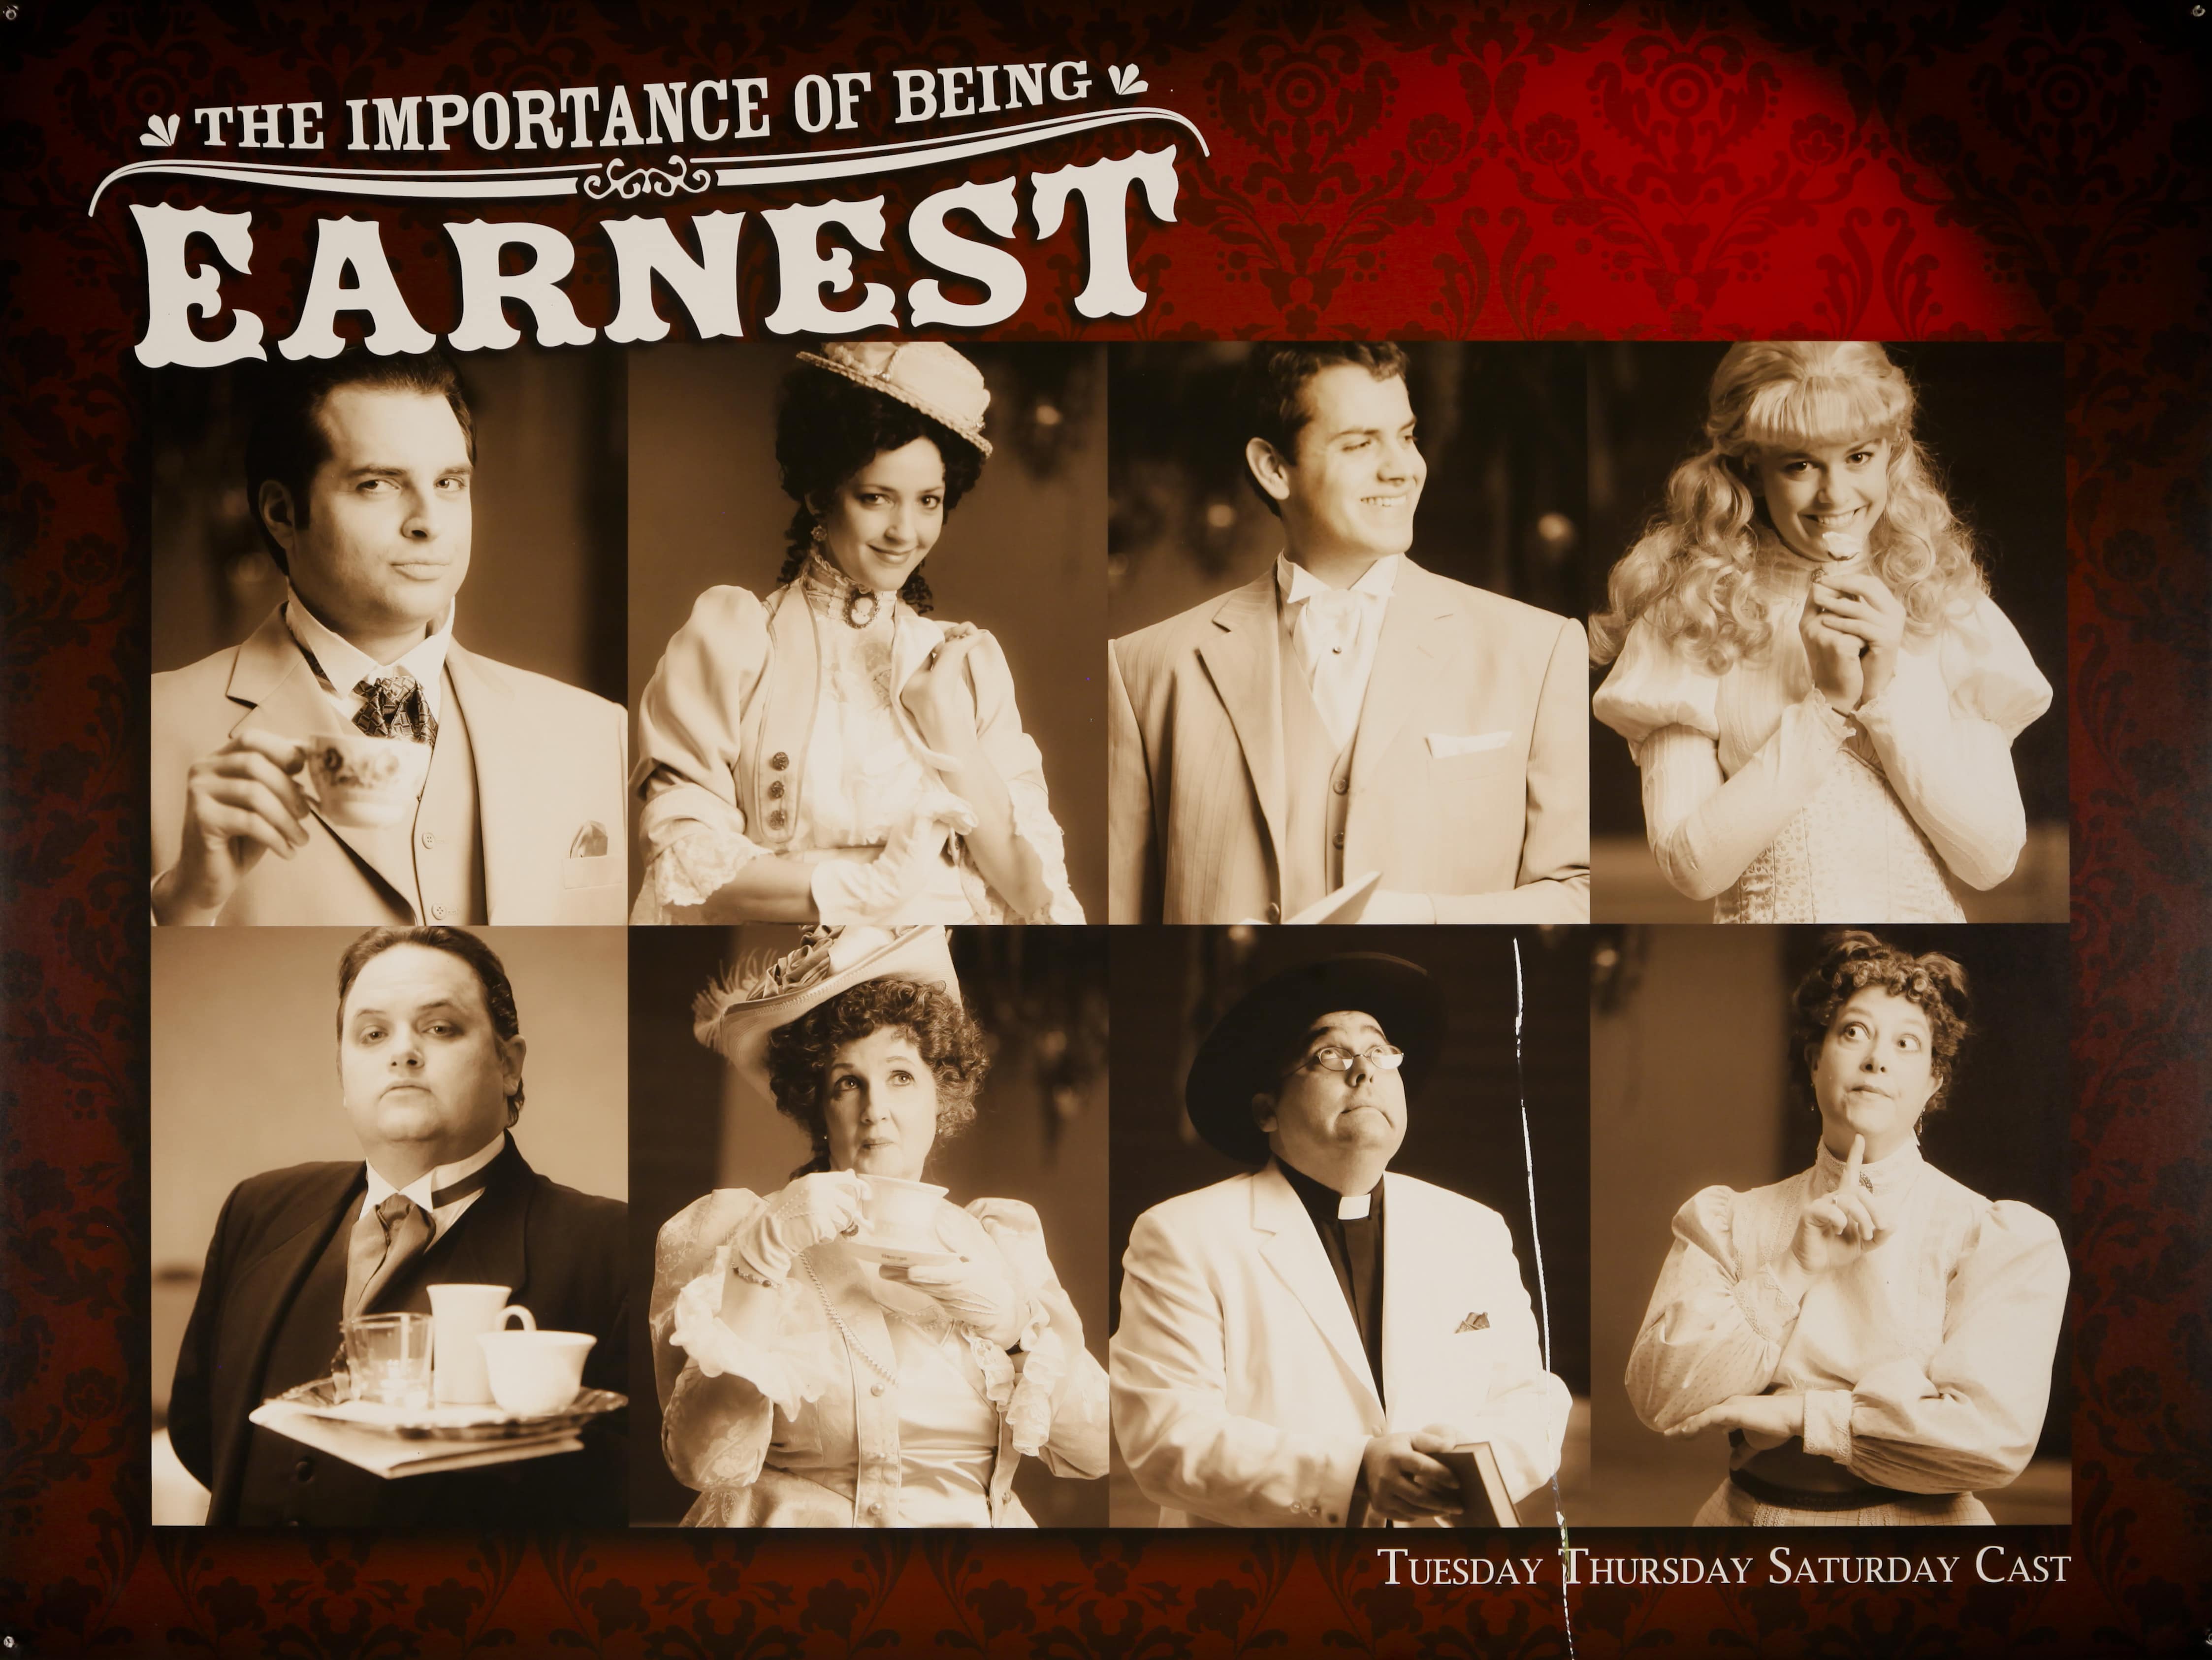 Hale Centre Theatre's 2010 The Importance of Being Earnest Cast